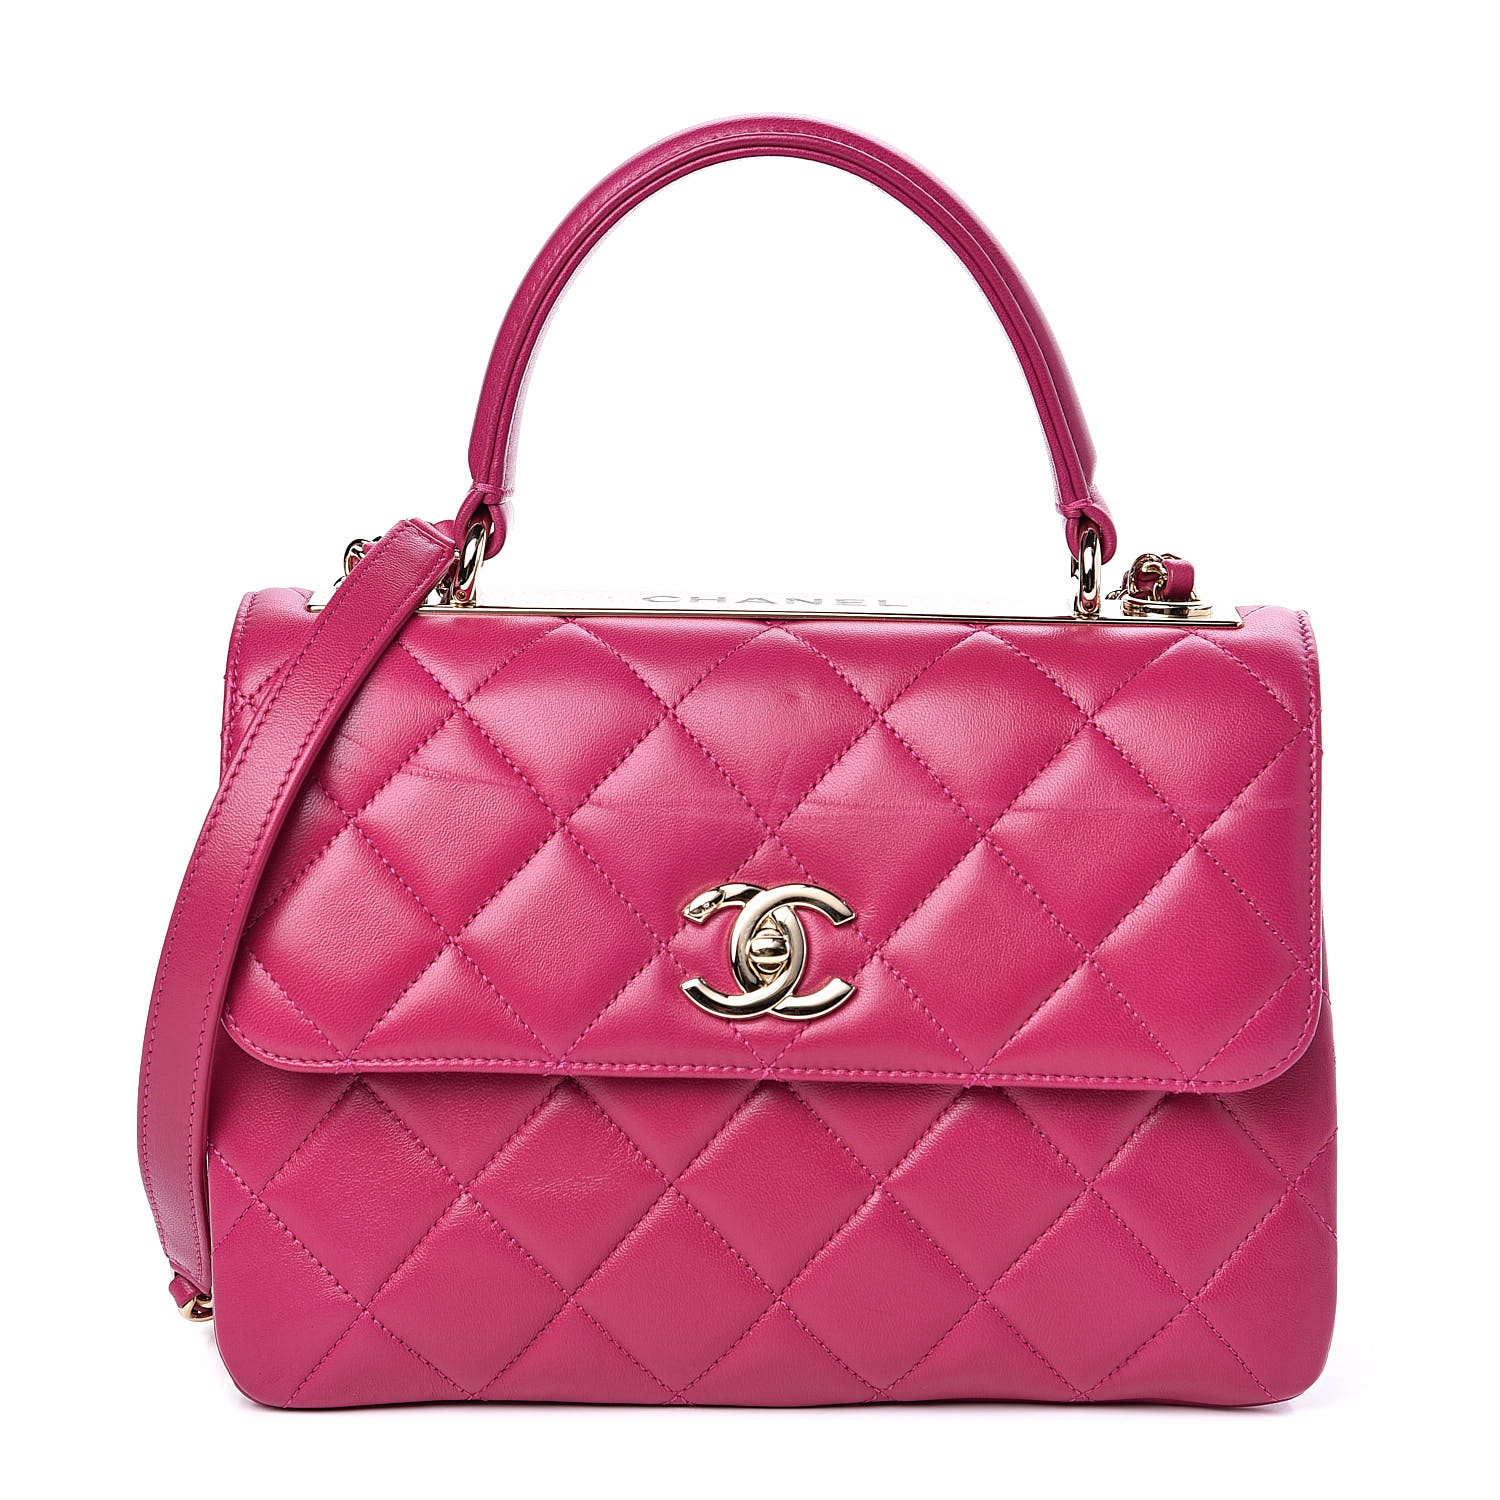 CHANEL Lambskin Quilted Small Trendy CC Dual Handle Bag Pink 503831